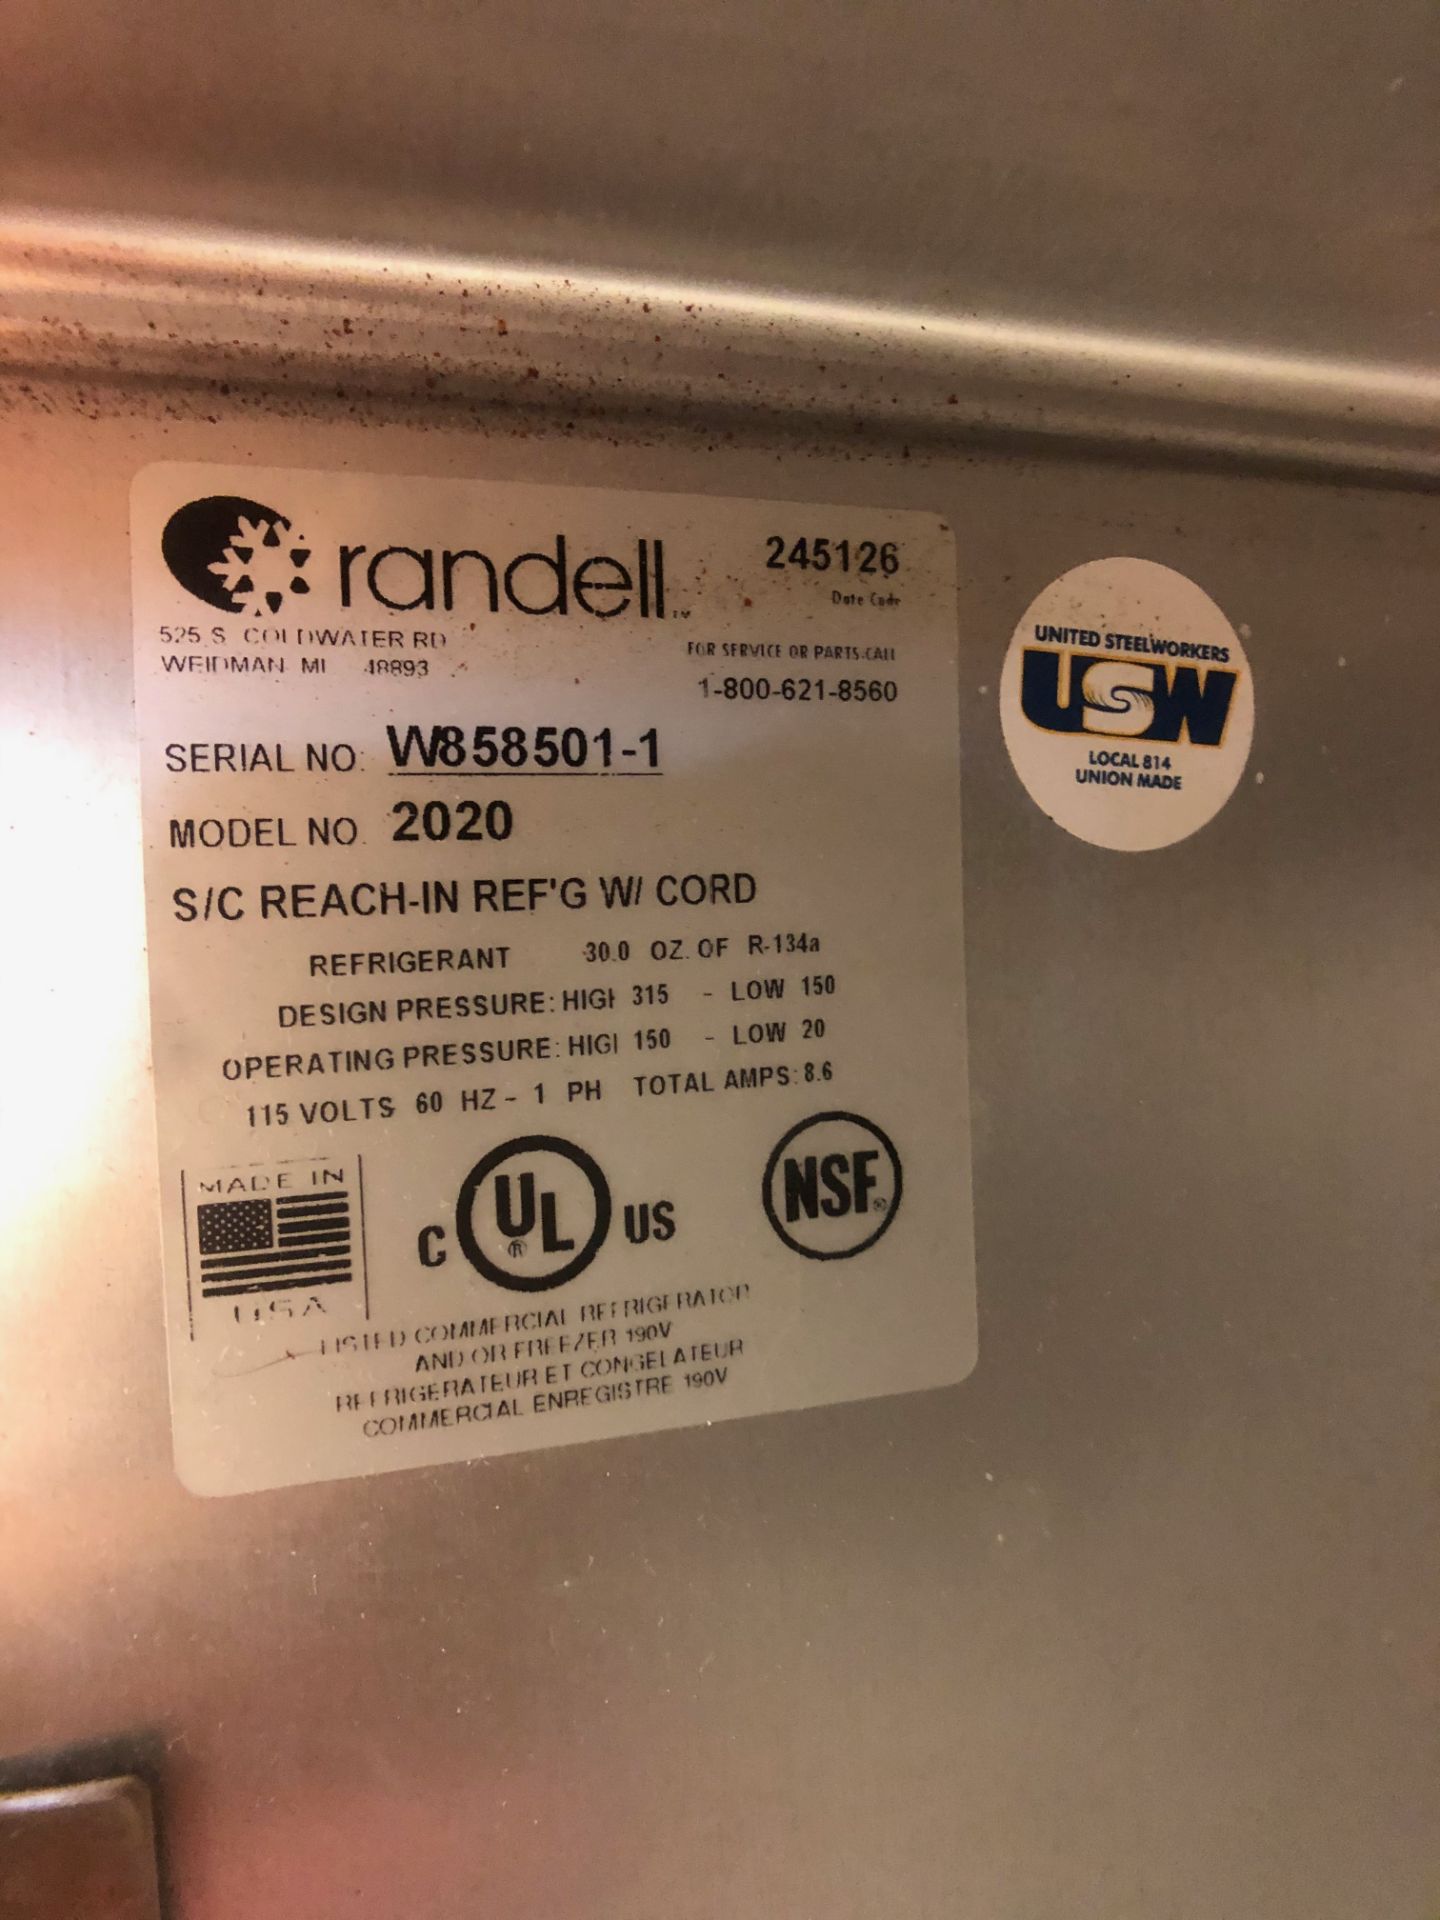 Randell 46 CuFt Reach-In S/S Refrigerator, Model 2020, S/N W858501-1, 2-Door, Mounted on Casters - Image 3 of 4